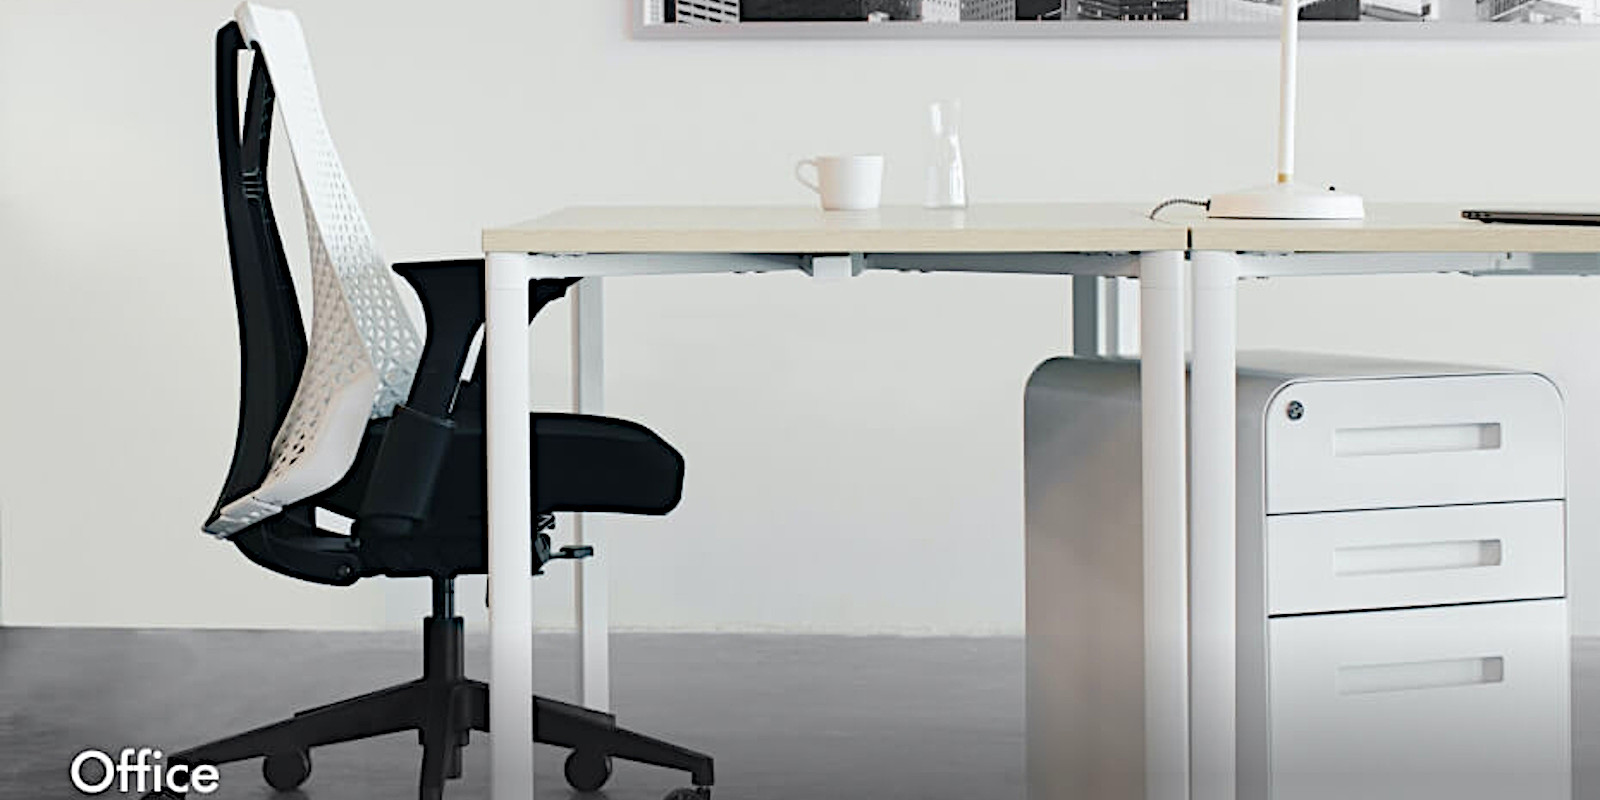 Office furniture discounted